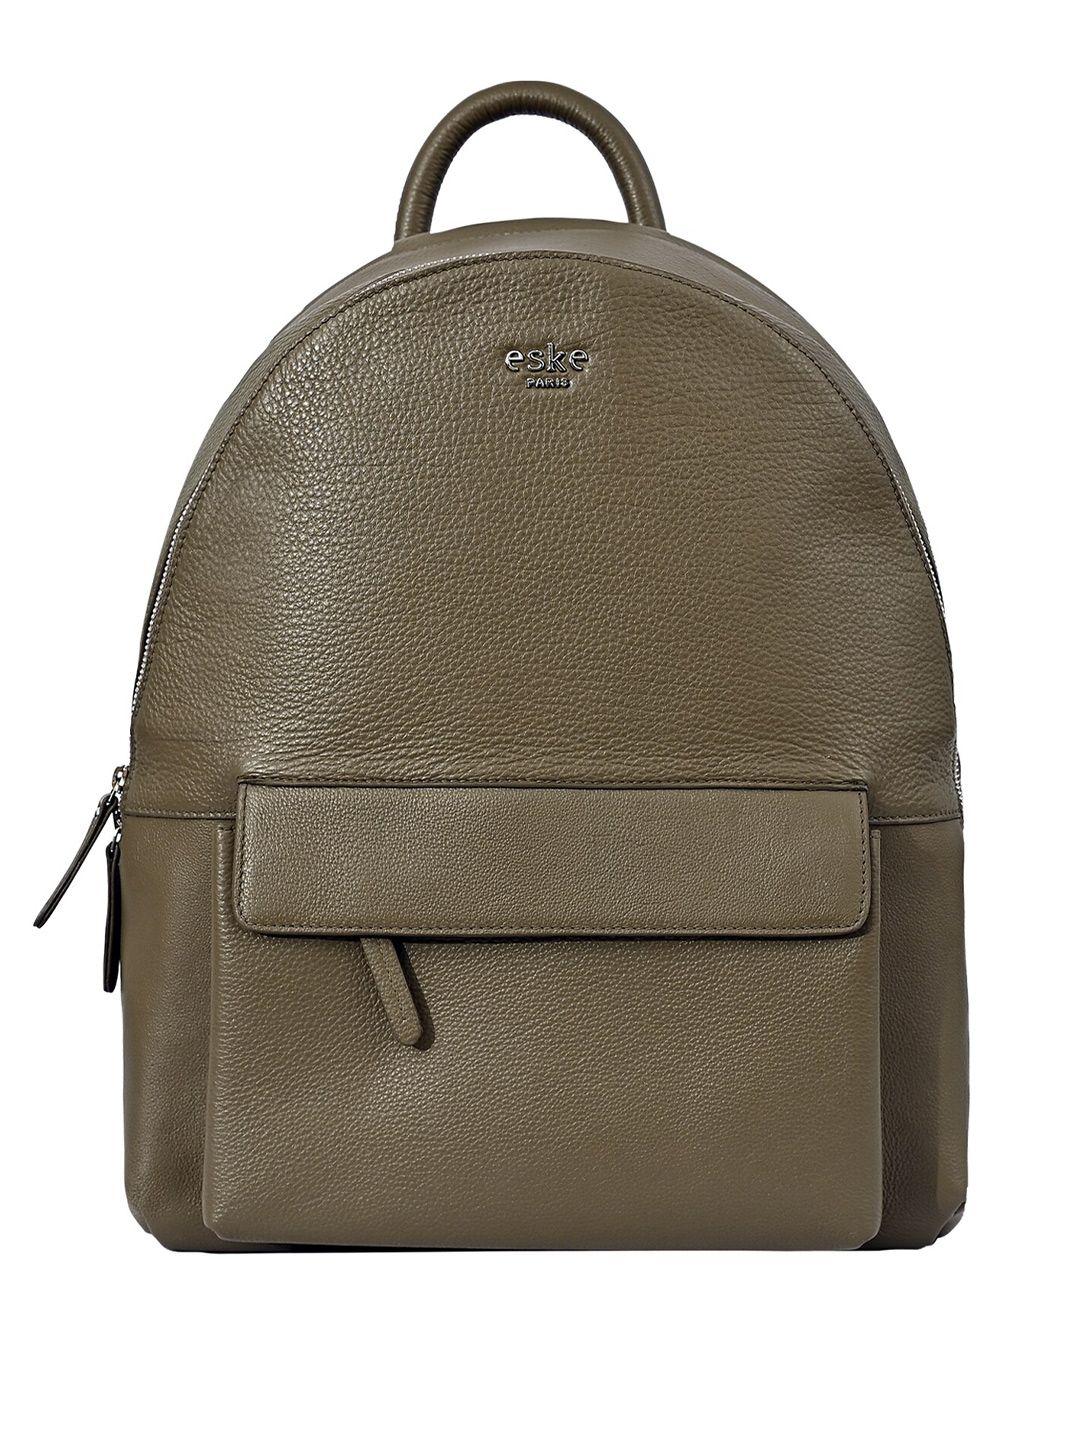 eske unisex leather backpack with compression straps